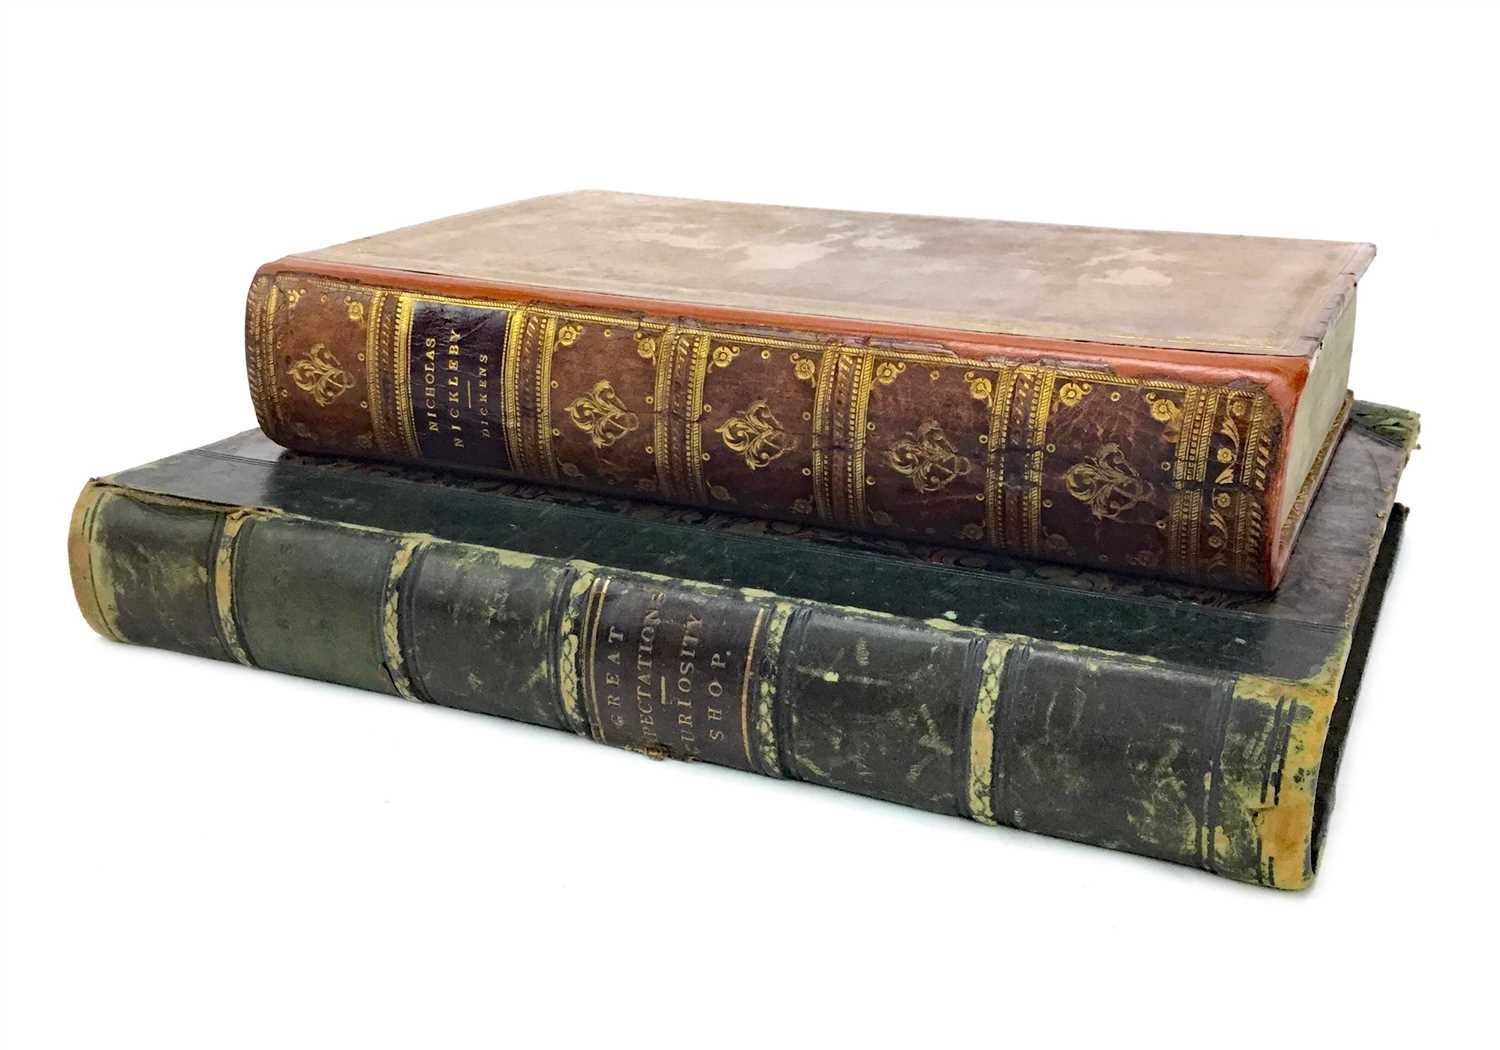 Lot 849 - THE LIFE AND ADVENTURES OF NICHOLAS NICKLEBY, BY CHARLES DICKENS